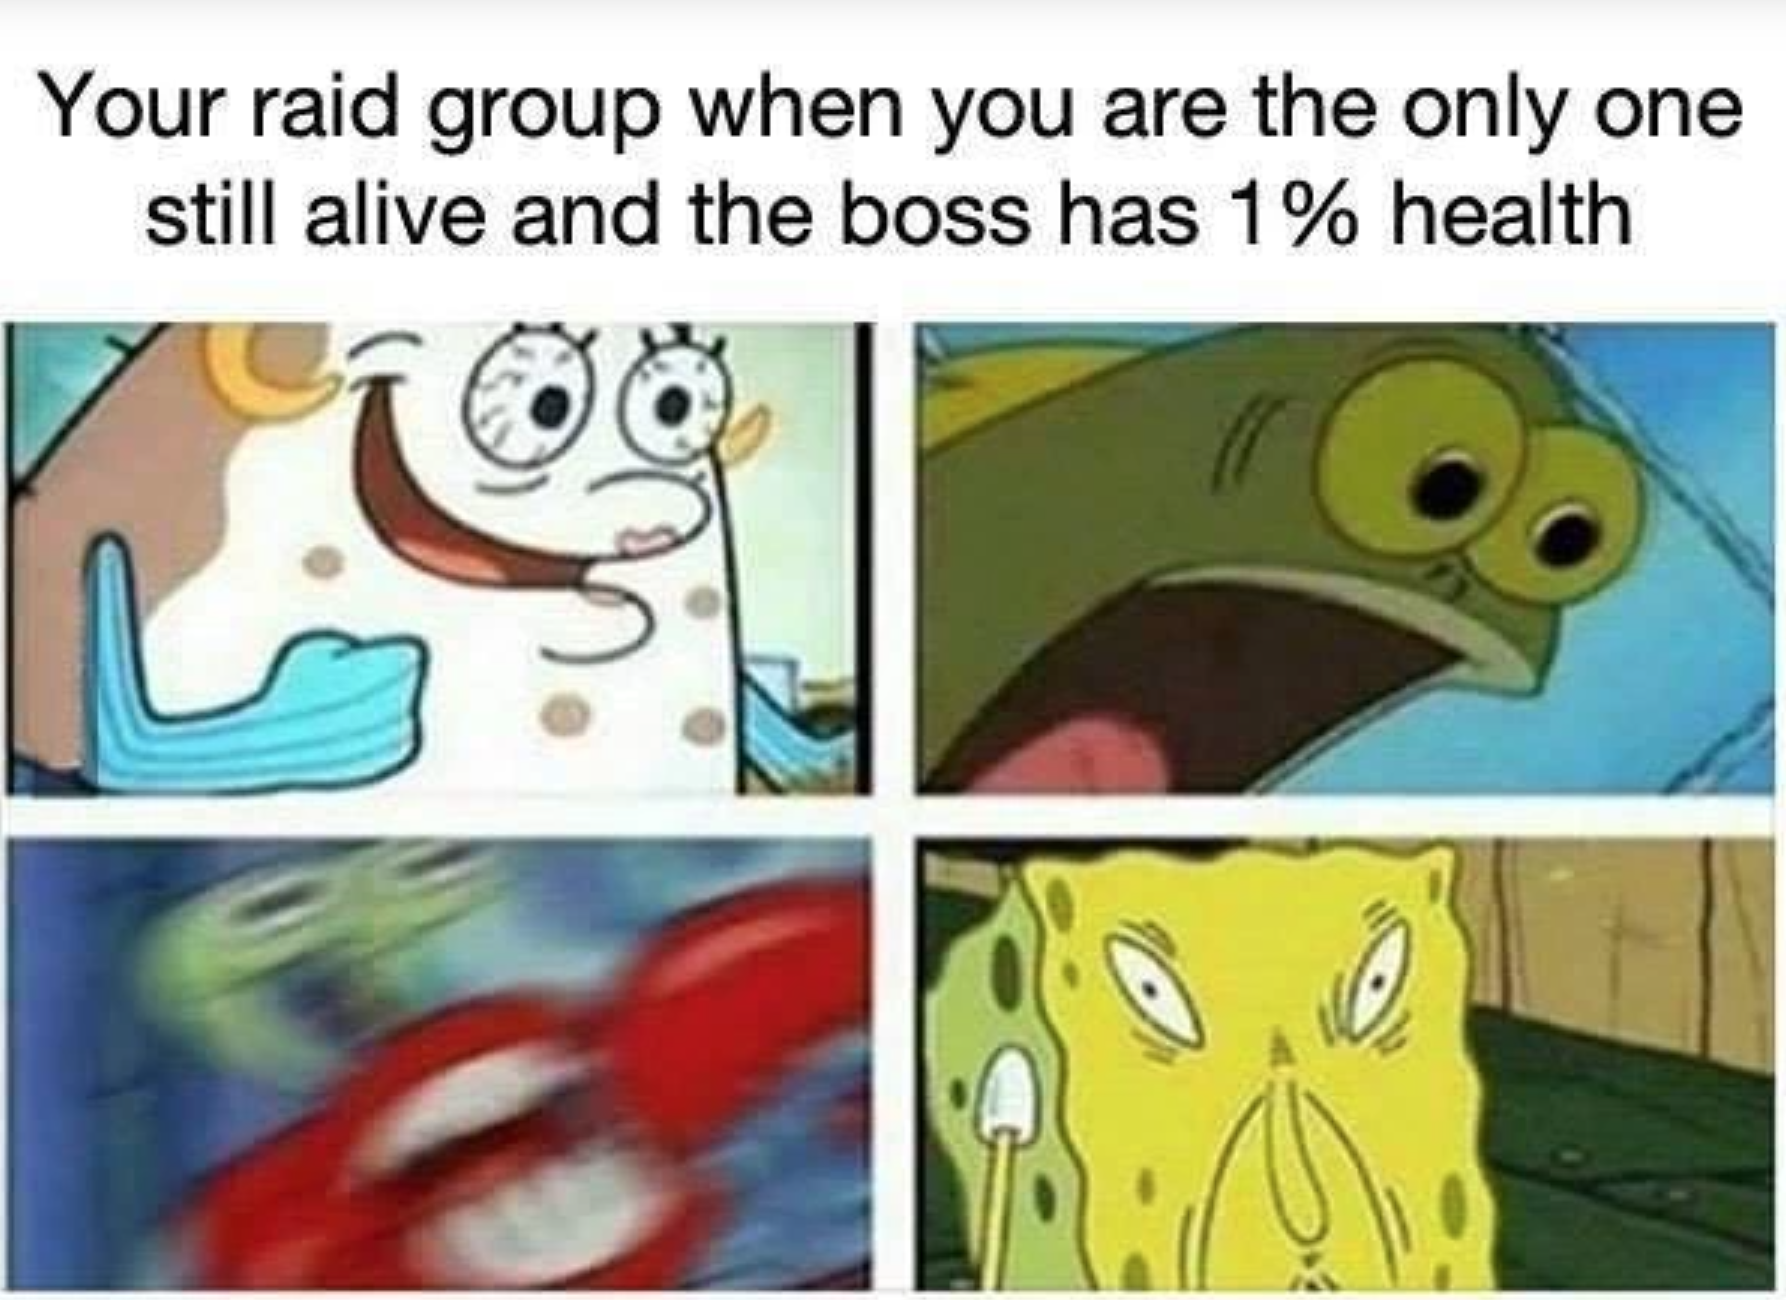 gaming memes and pics - 4 stage of masturbation - Your raid group when you are the only one still alive and the boss has 1% health